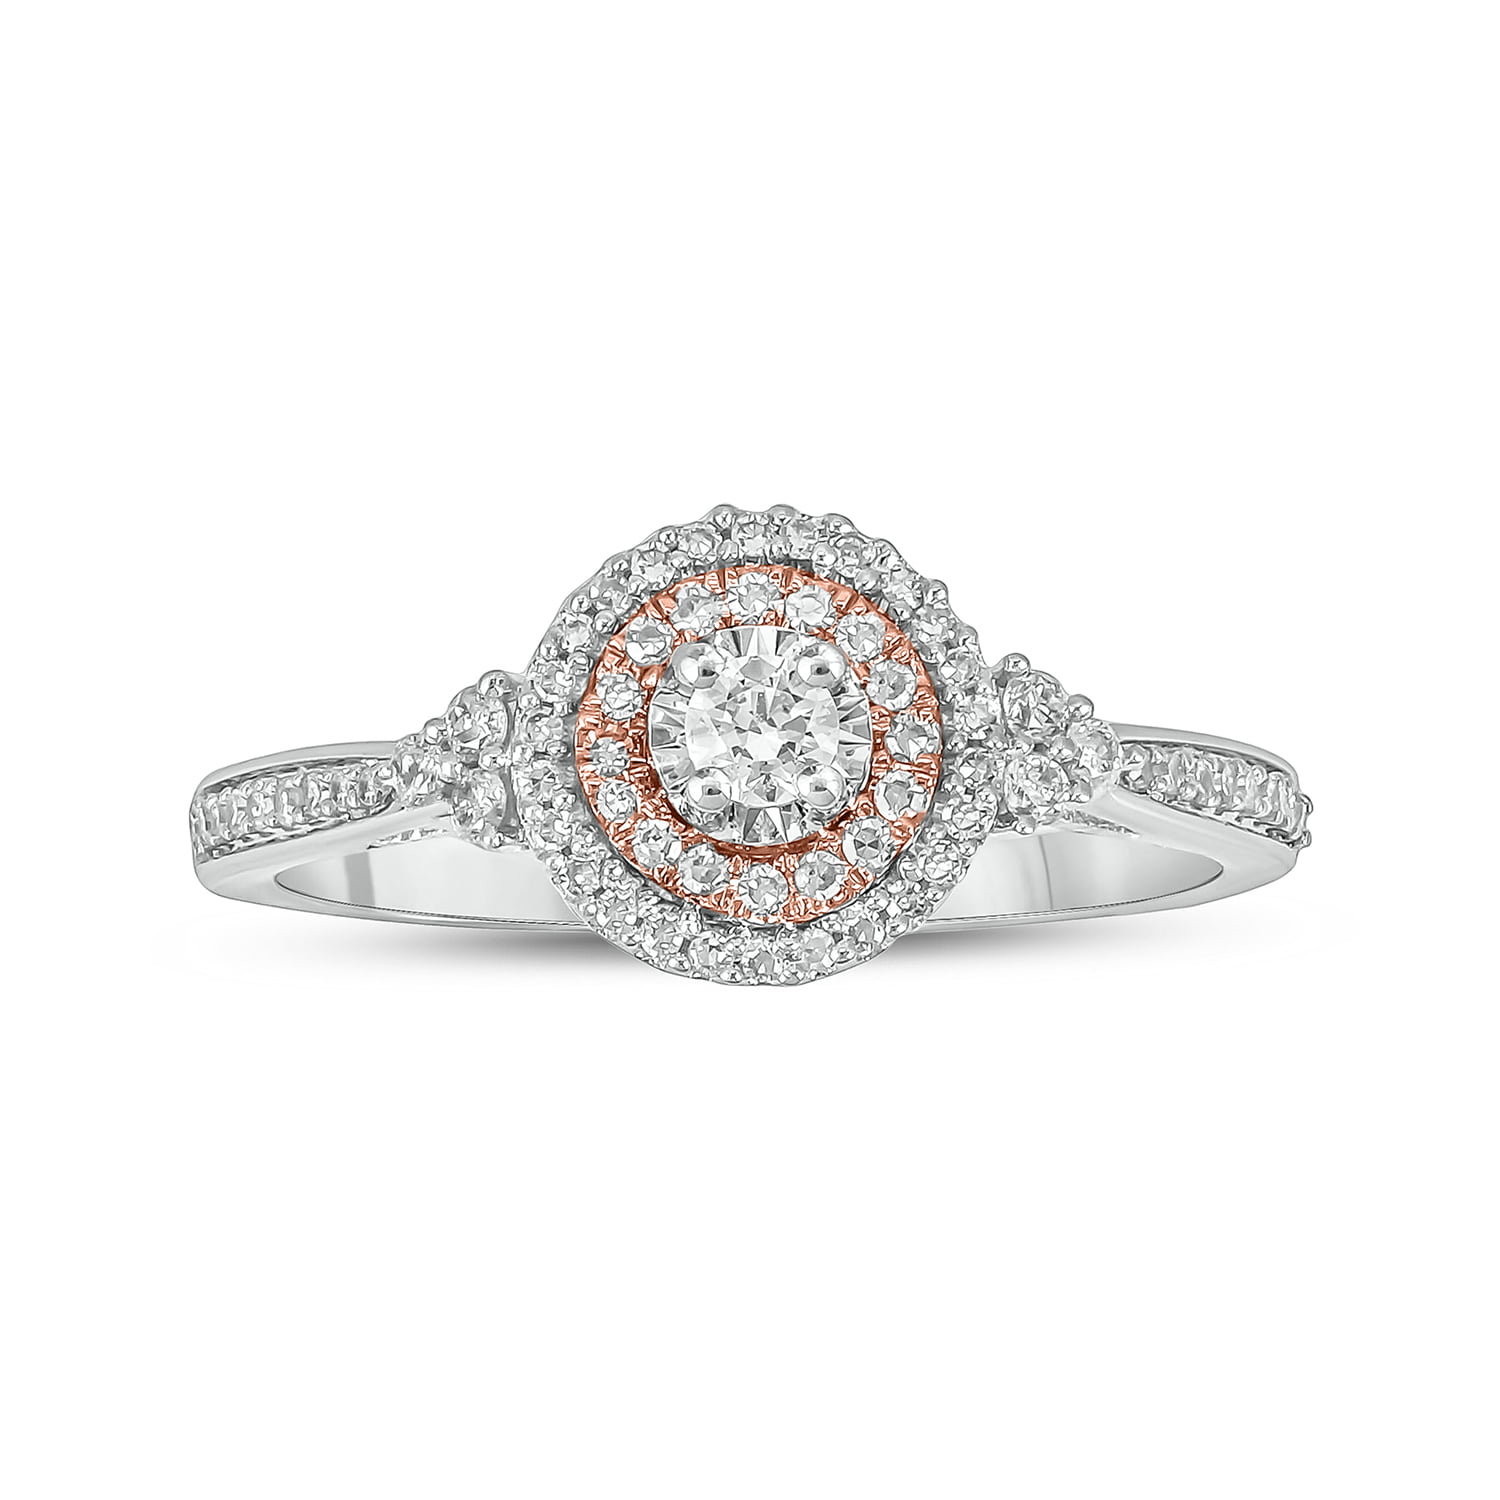 Details about  / Dainty Round Cut Diamond 3ct Beautiful Classic Proposal Ring 14K White Gold Over